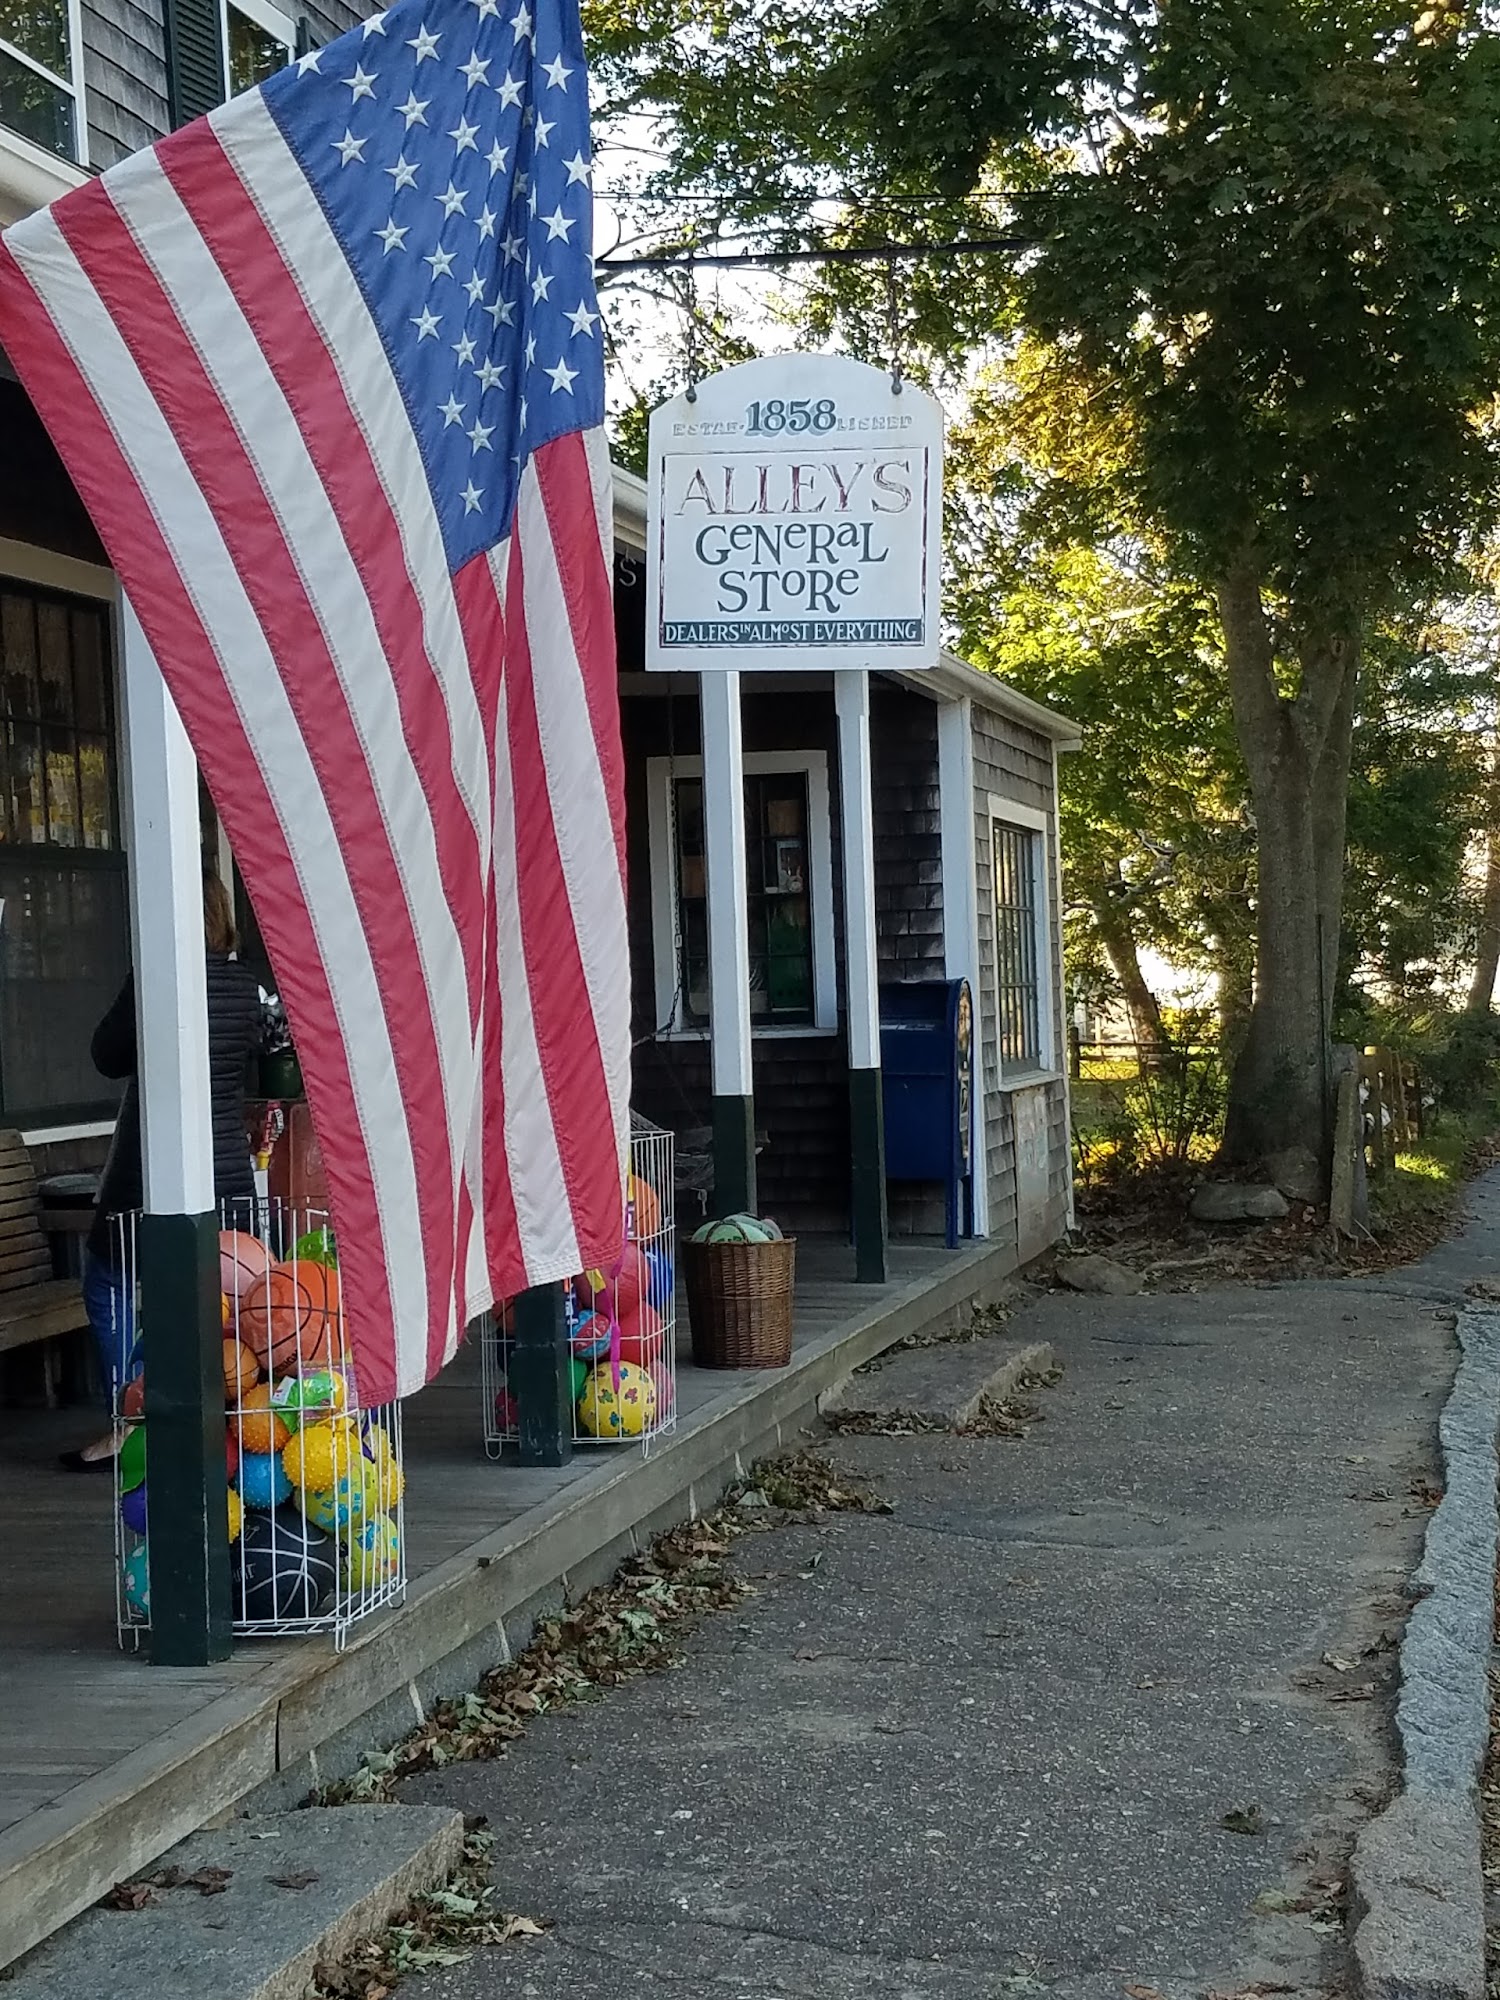 Alley's General Store